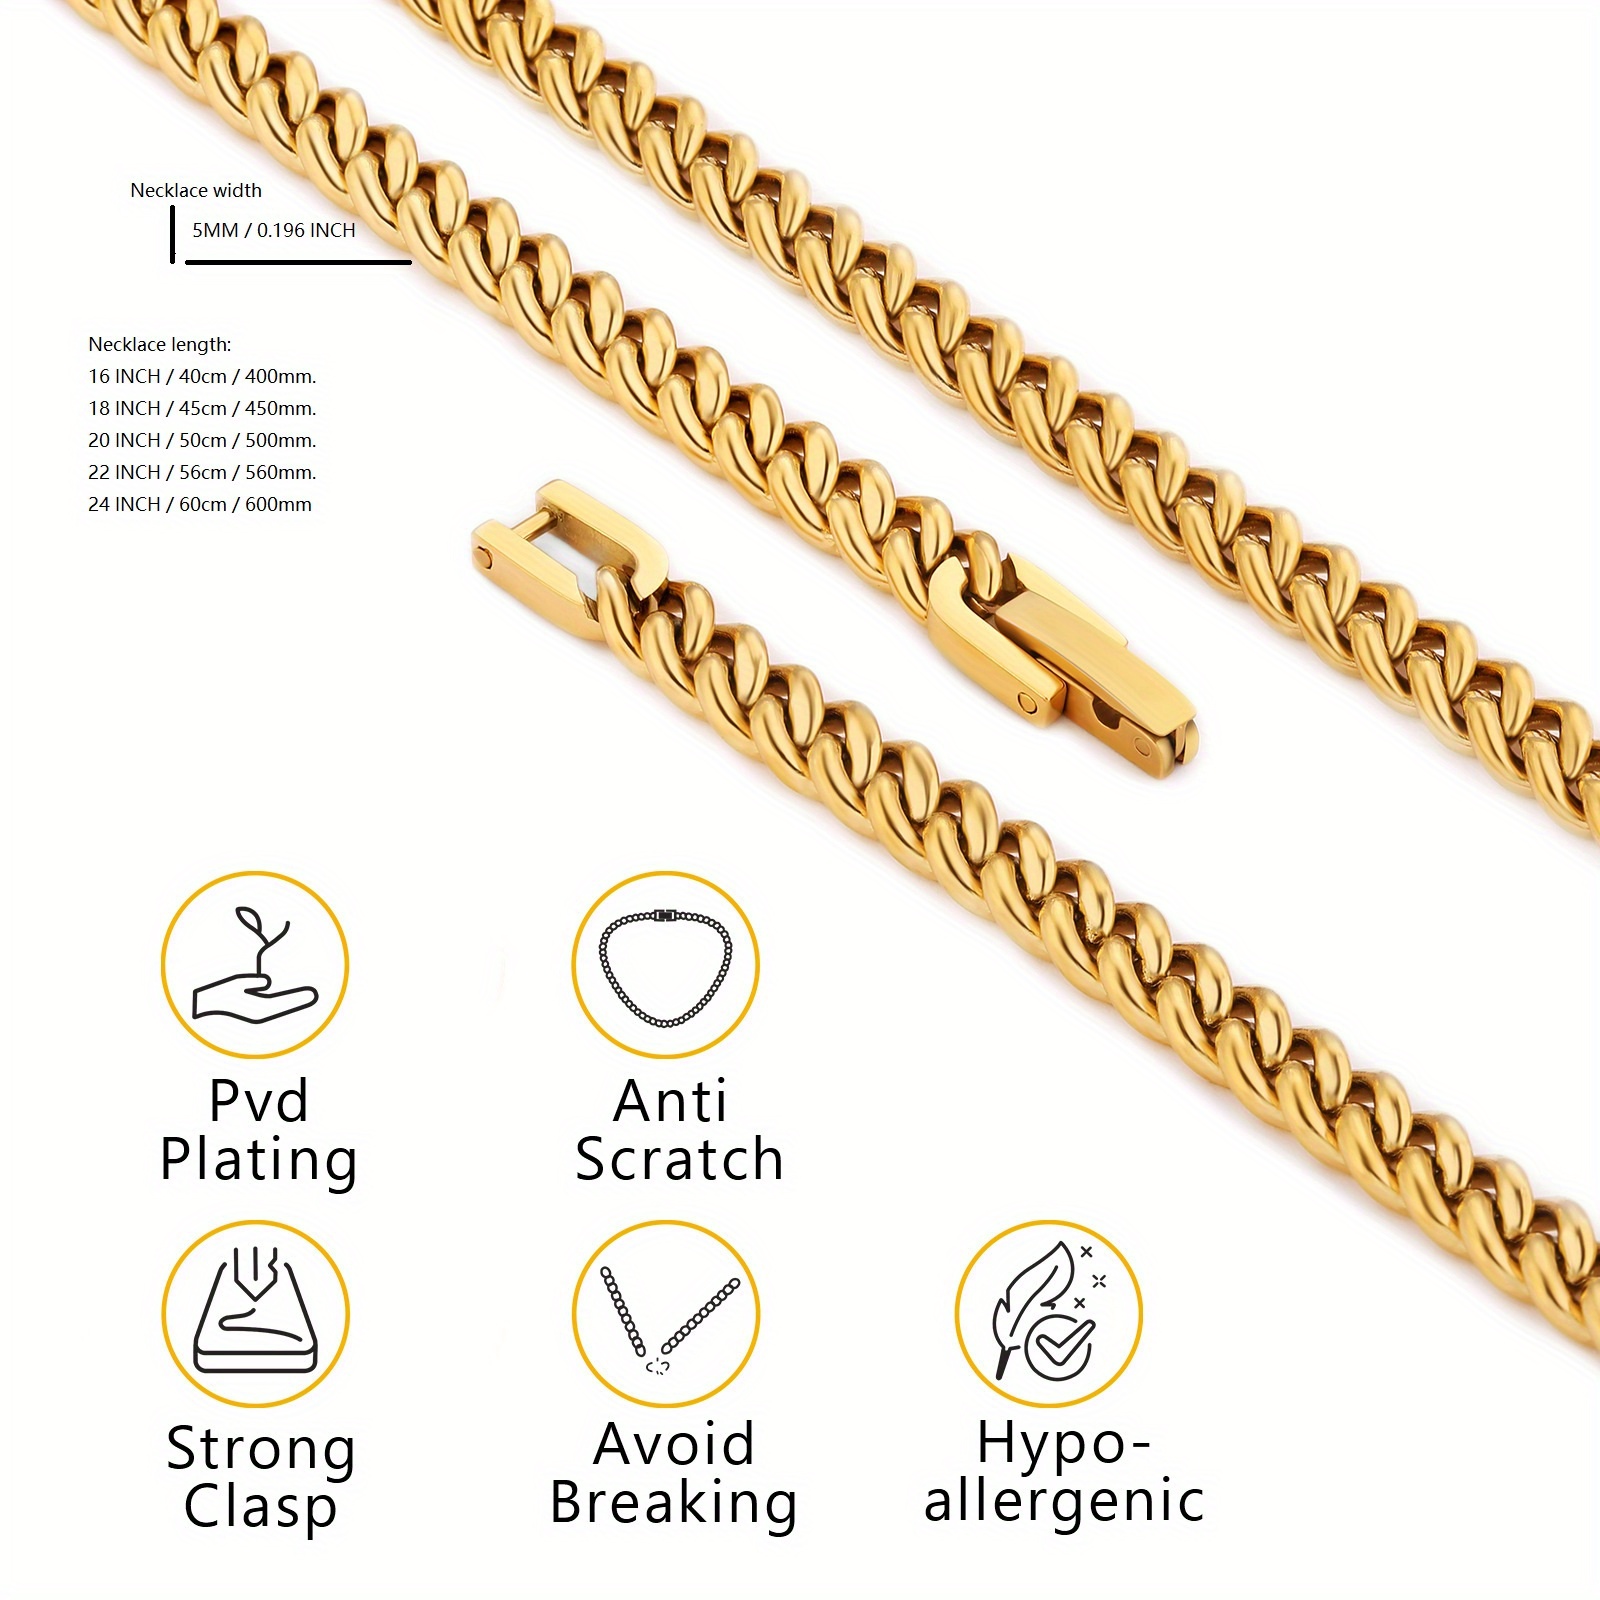 18K Gold Over 925 Sterling Silver Clasp Chain for Mens Necklace Cuban Link Chain  Necklace 3.5mm Diamone Cut Gold Mens Chain Necklace 16 18 20 22 24 26 28 30  Inches, 18, Sterling Silver, No Gemstone : Amazon.co.uk: Fashion